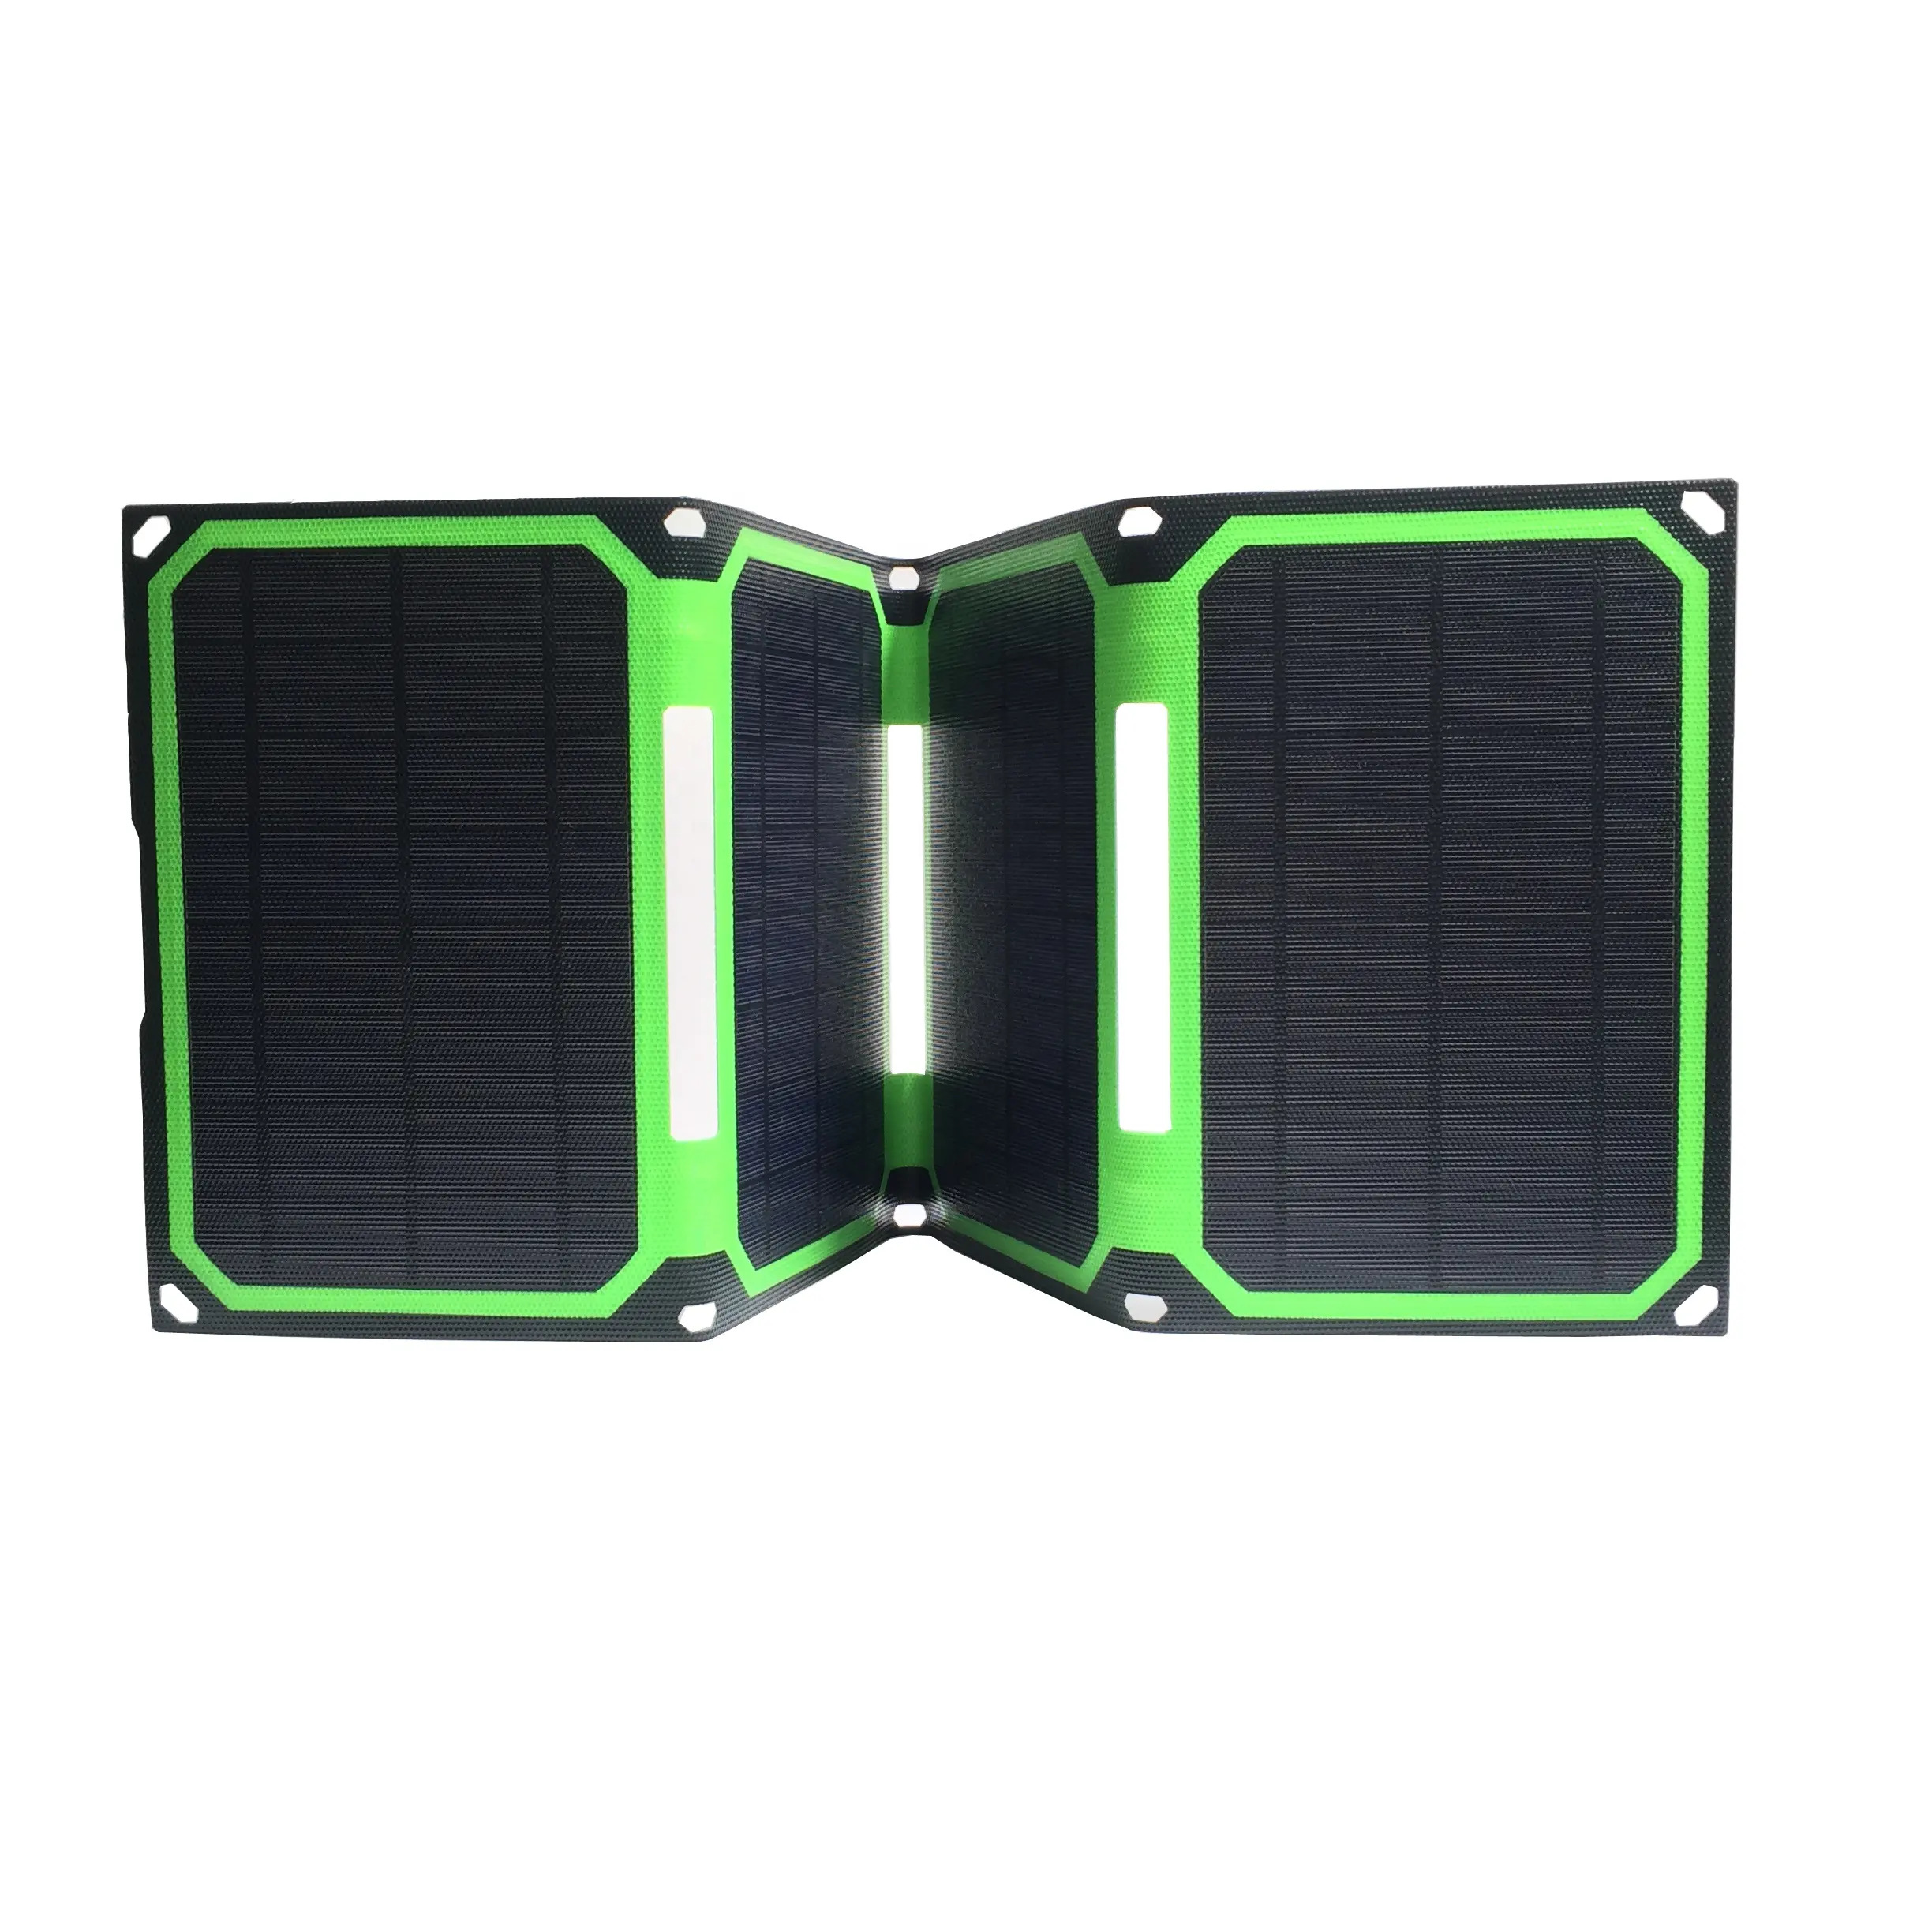 25W portable ETFE foldable solar solar mobile phone charger laptop charger